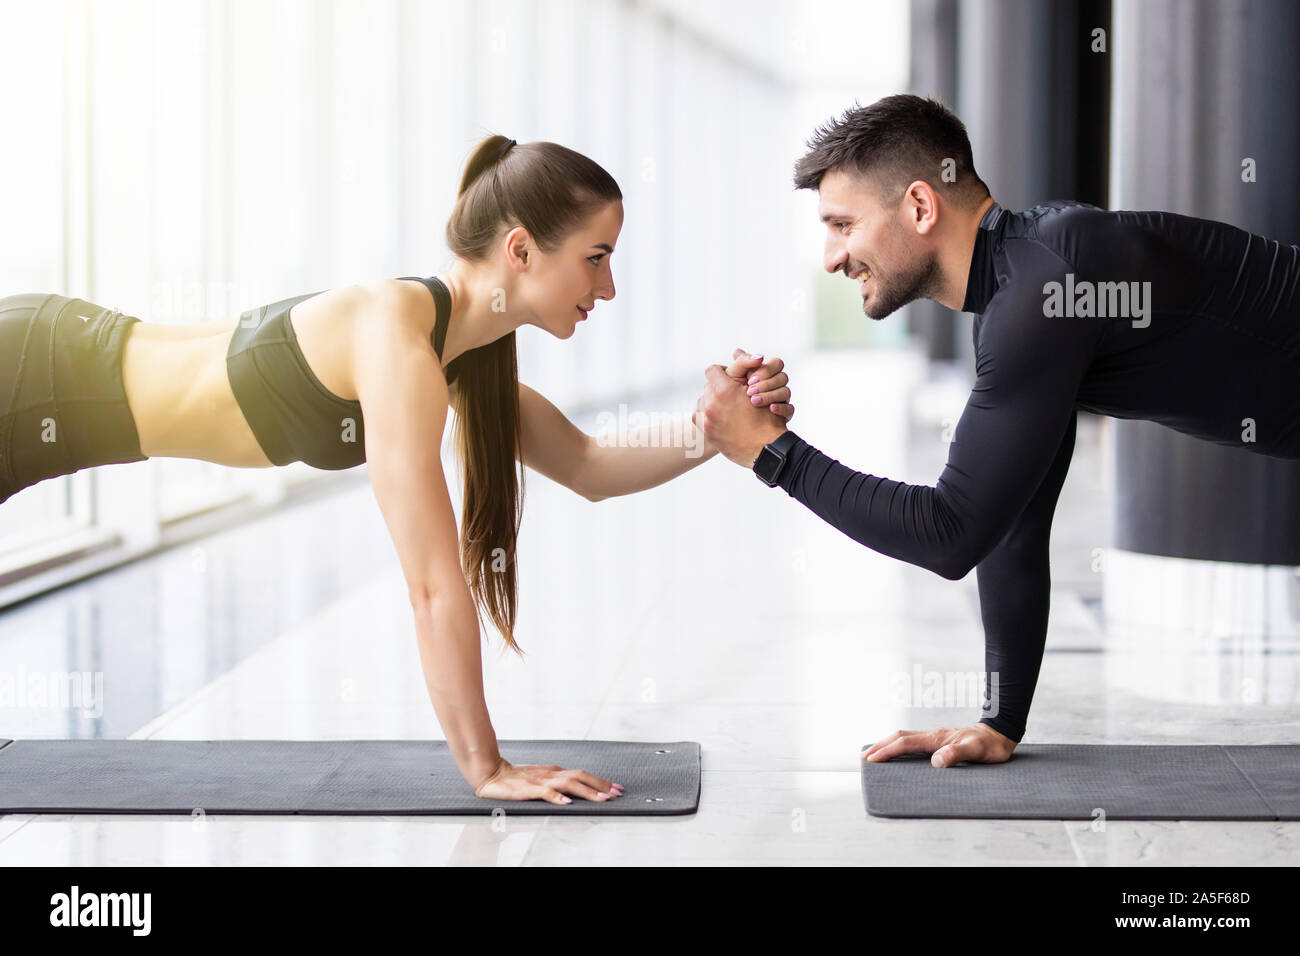 Slim girl and strong man are standing in one hand plank position and balancing on that hand. They look concentrated and concious. Stock Photo